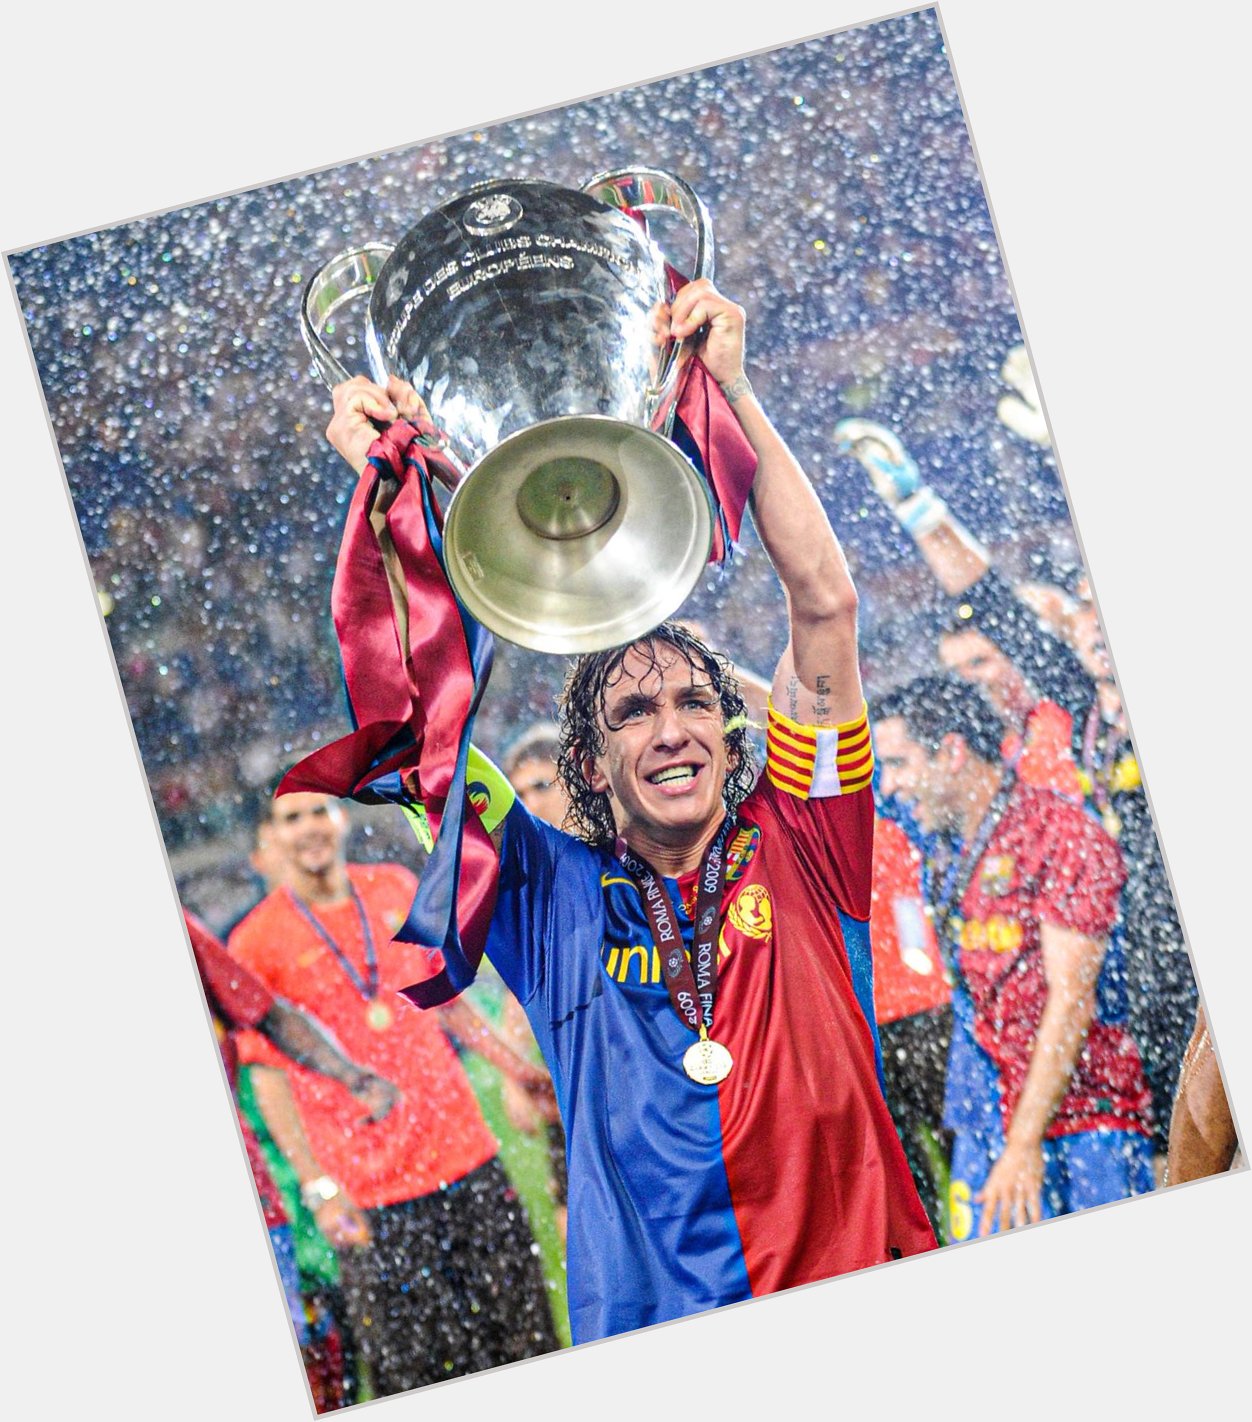 Happy Birthday to Carles Puyol . The player who resembles Fair play , Leadership and Sportsmanship 